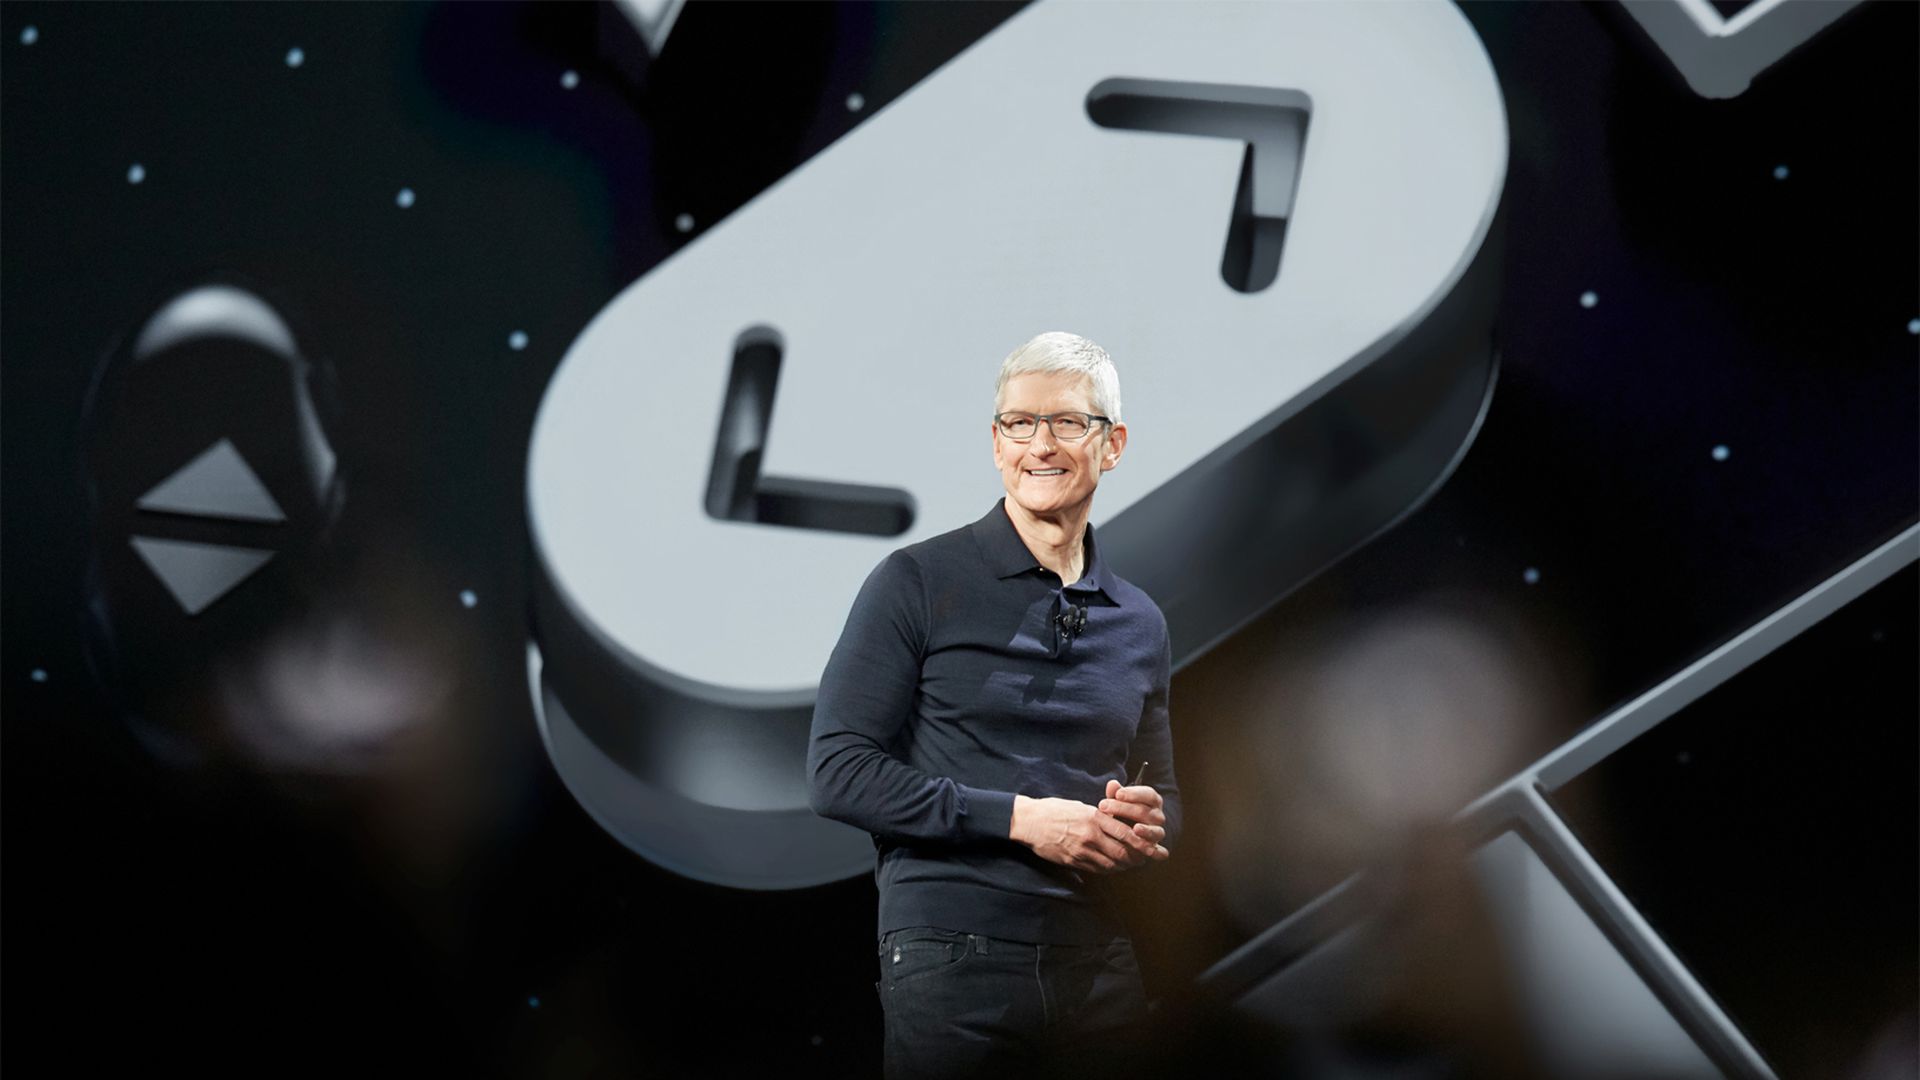 Tim Cook, speaking at an Apple event